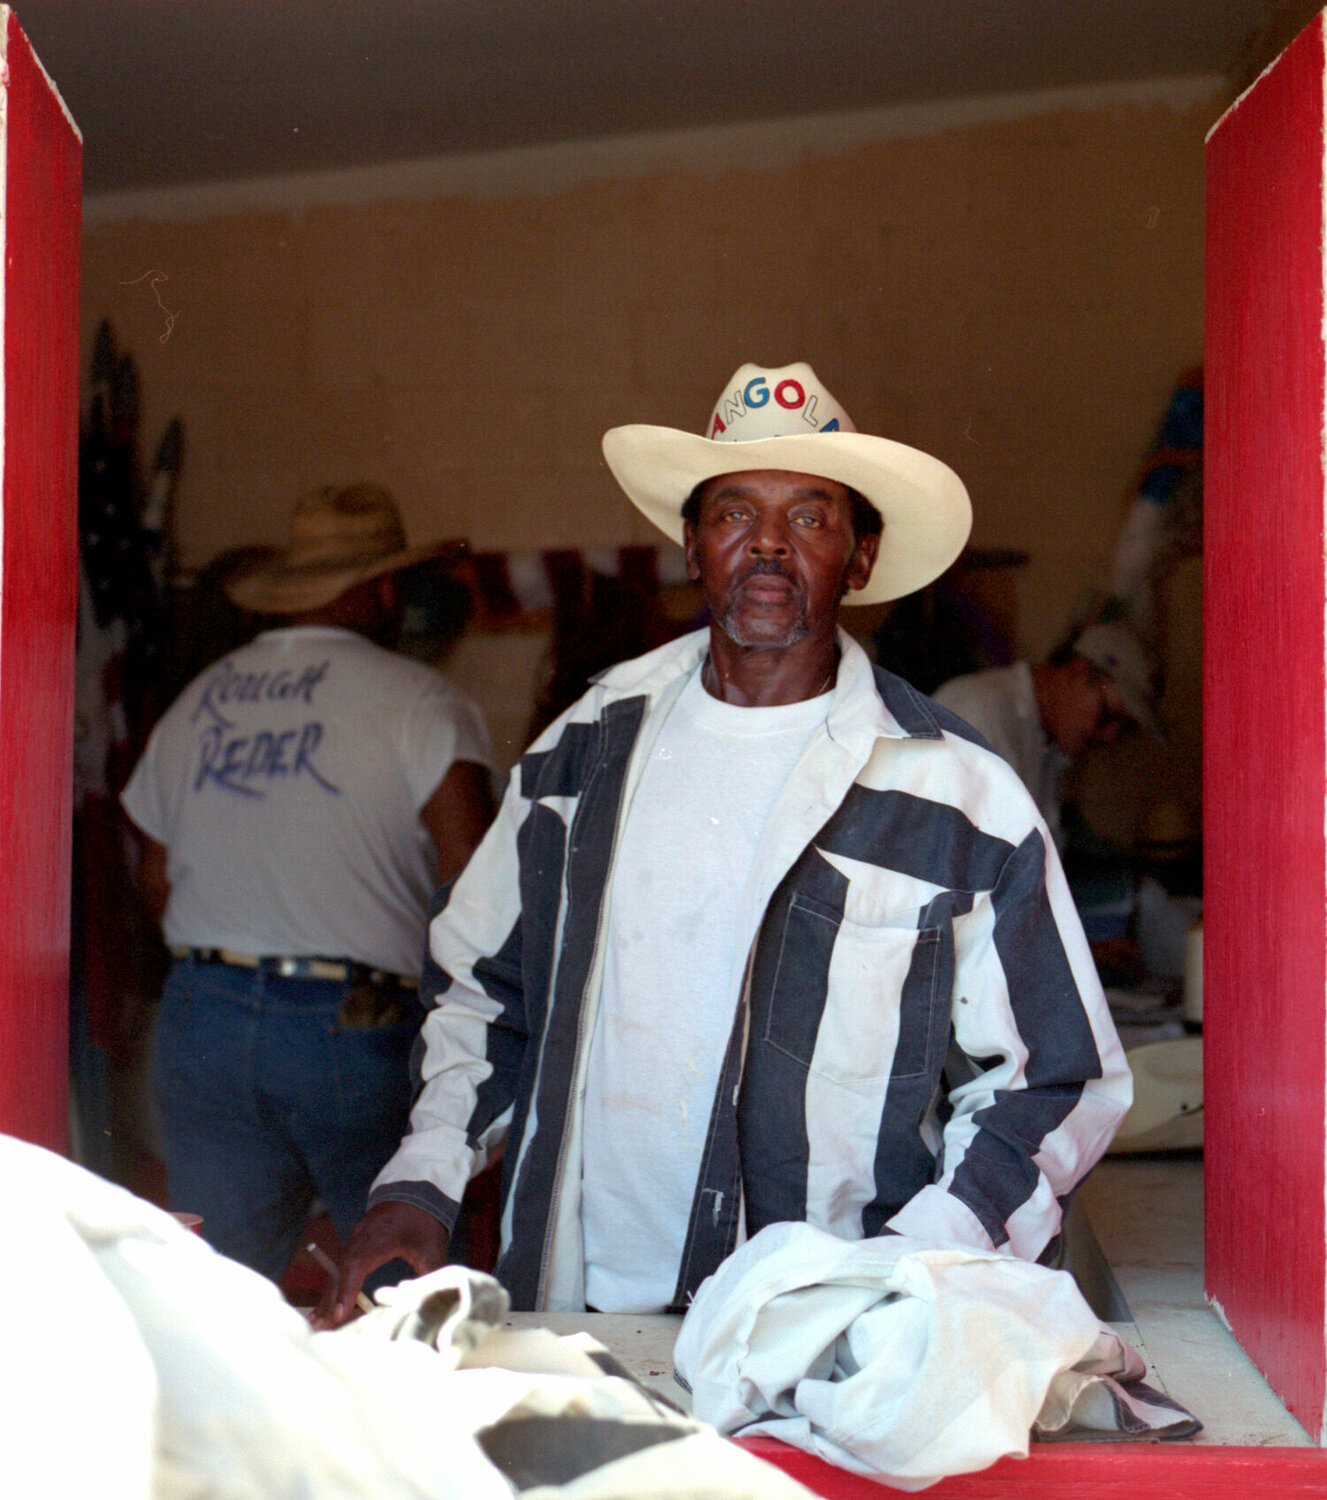 "The Farm: Inside Angola's Prison Rodeo" by Chris Heim examines the rodeo. Riders are from the notorious Louisiana prison.